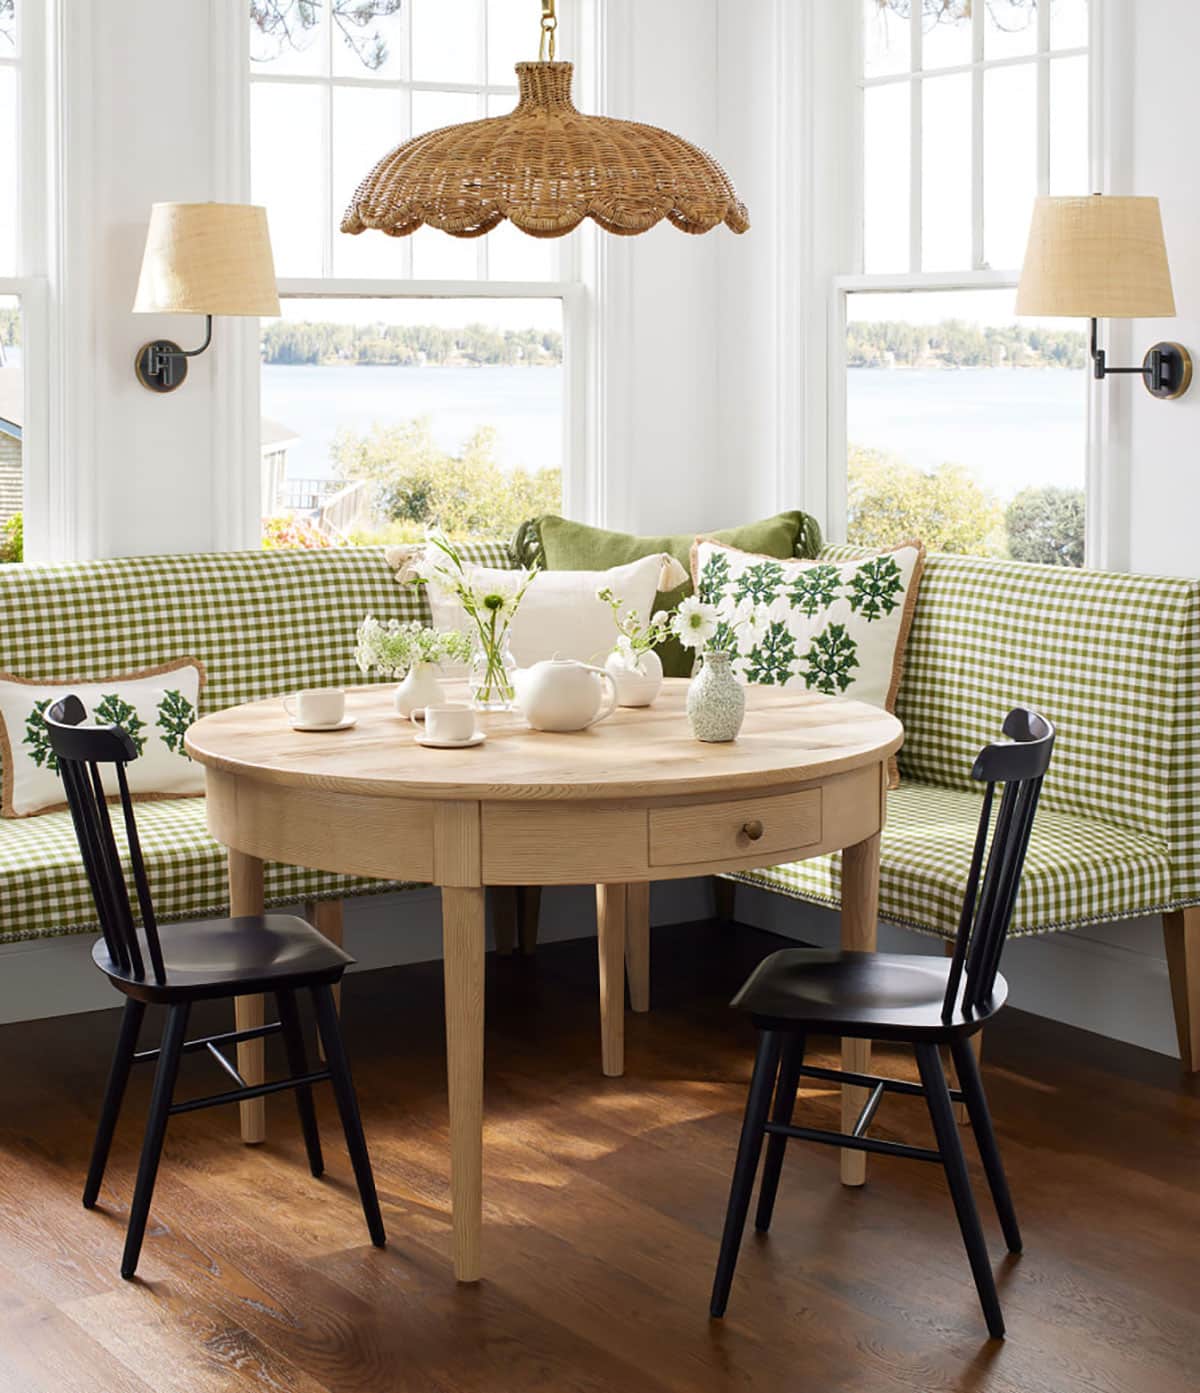 gorgeous banquette in the kitchen